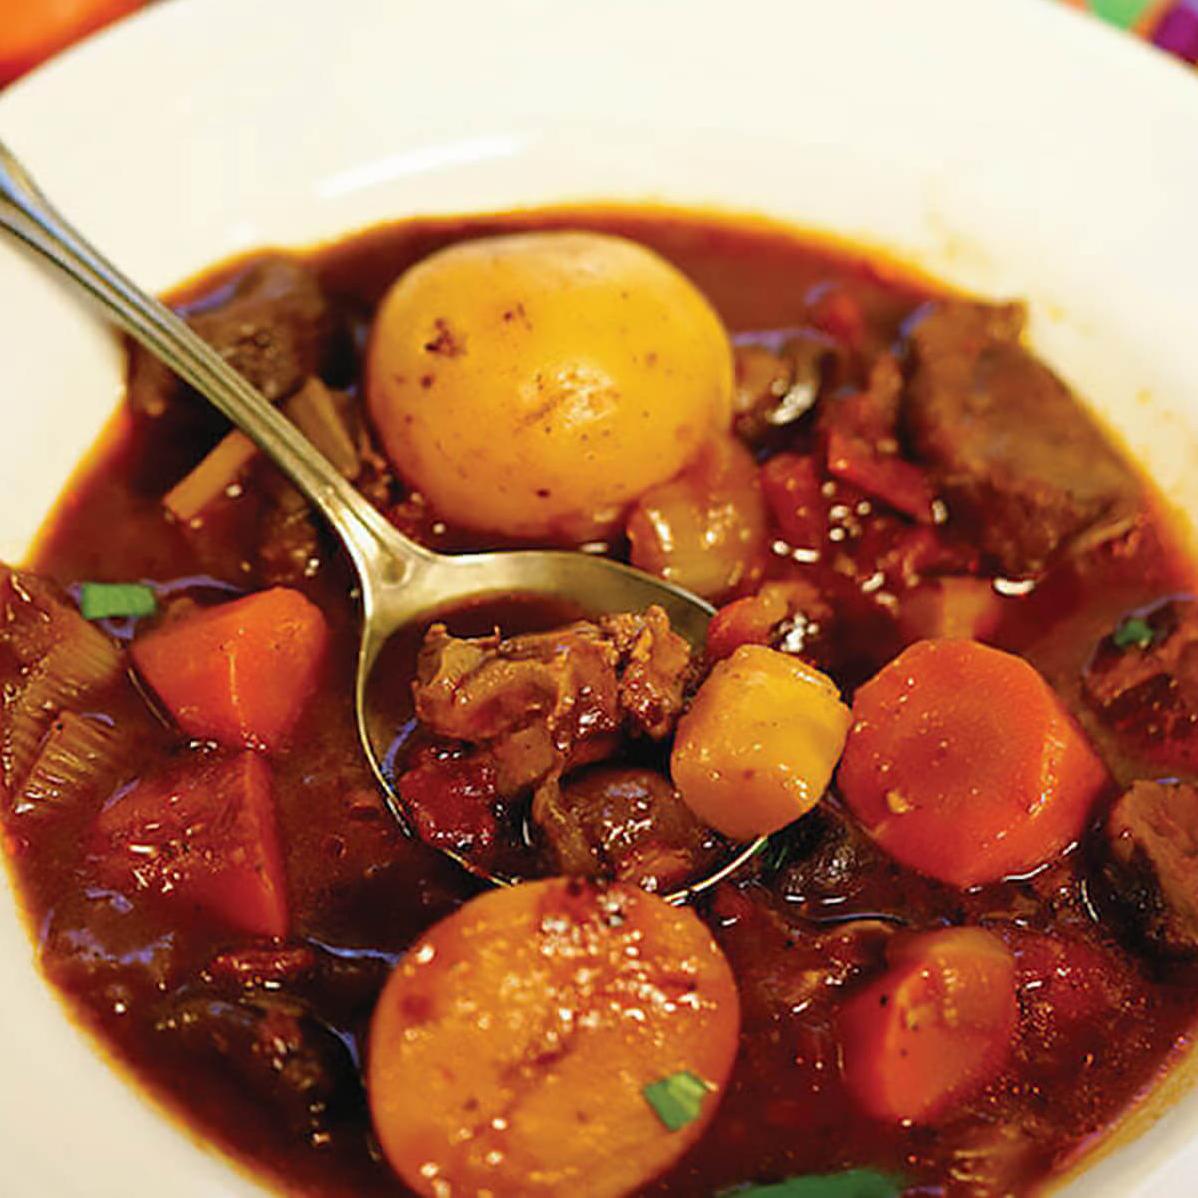  This stew is sure to become a staple recipe in your household